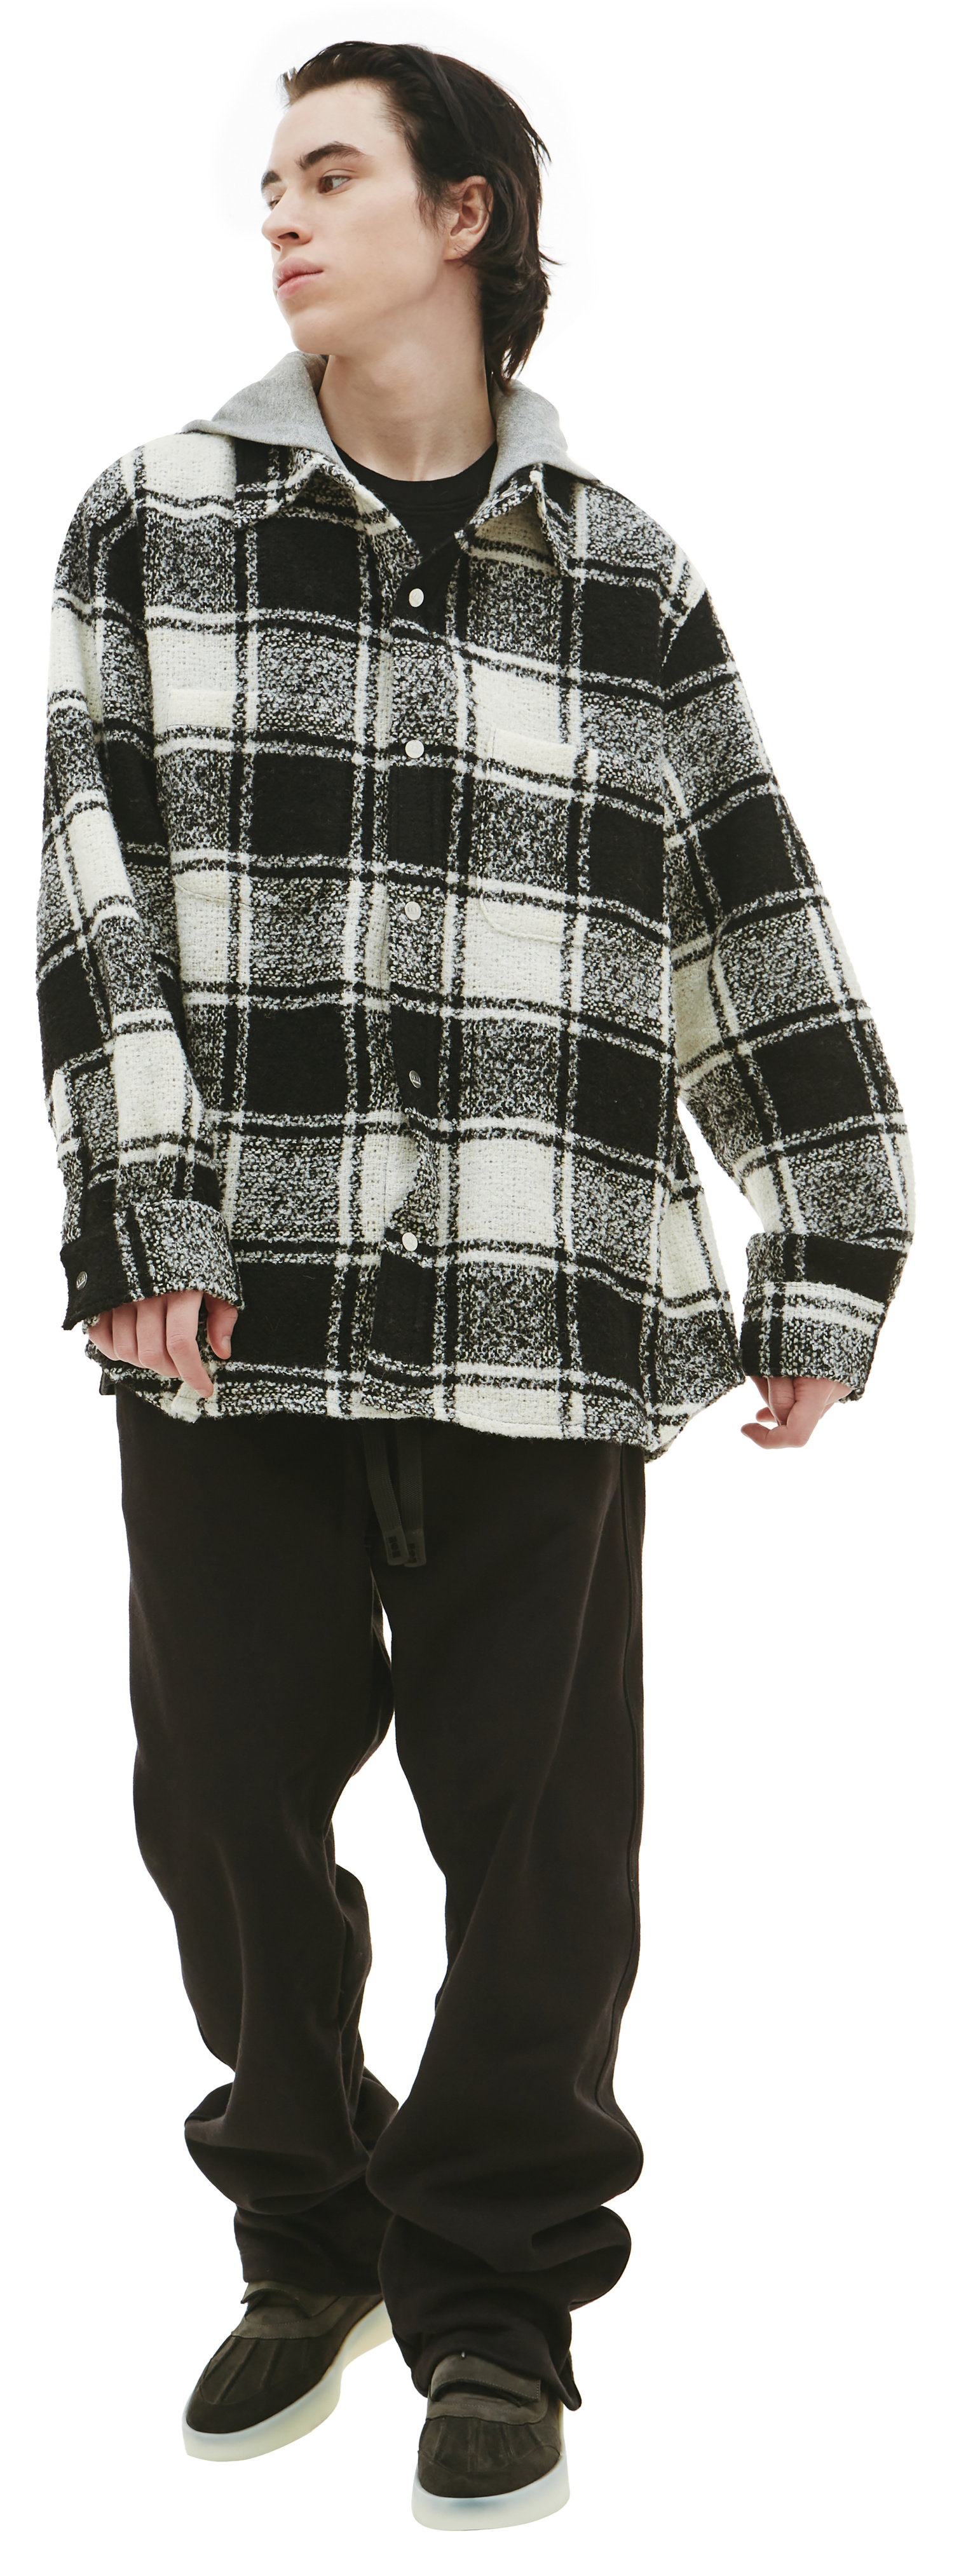 Nahmias Flannel shirt with hooded